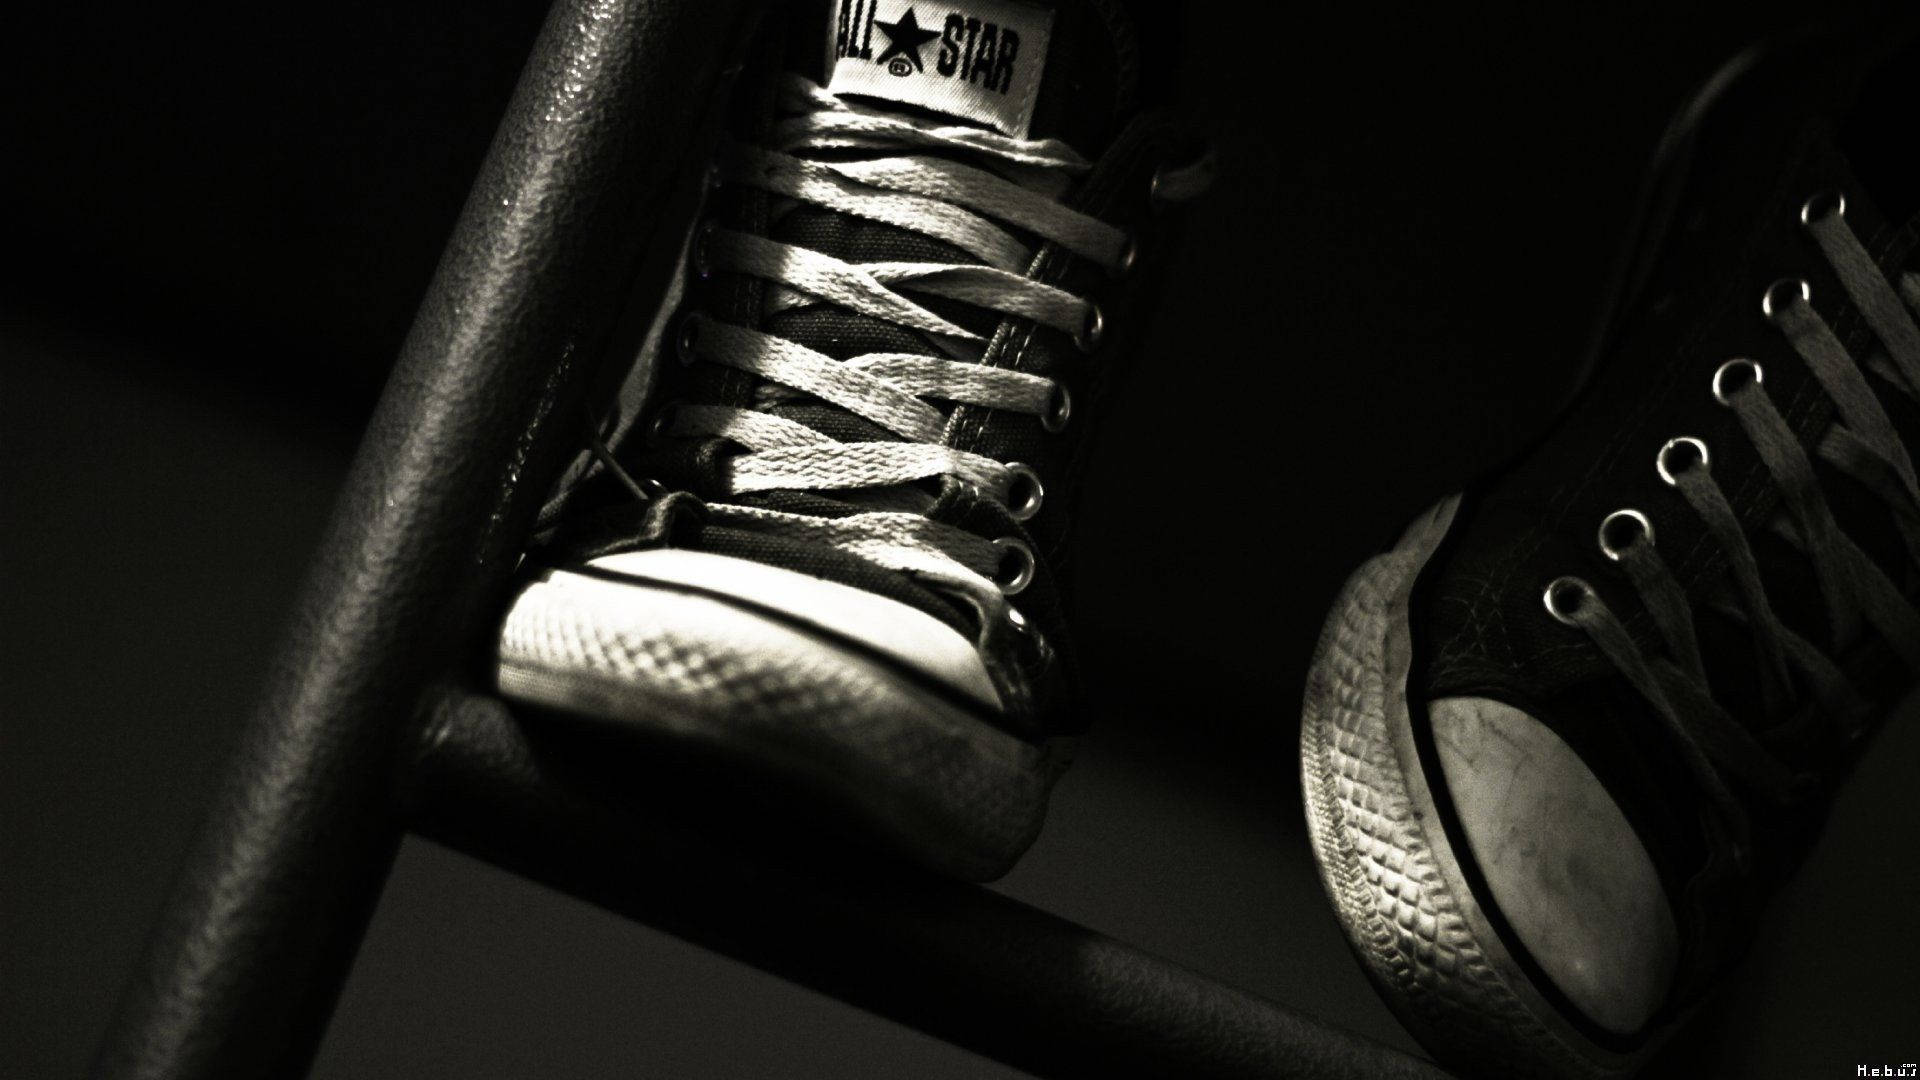 Converse 1920X1080 Wallpaper and Background Image